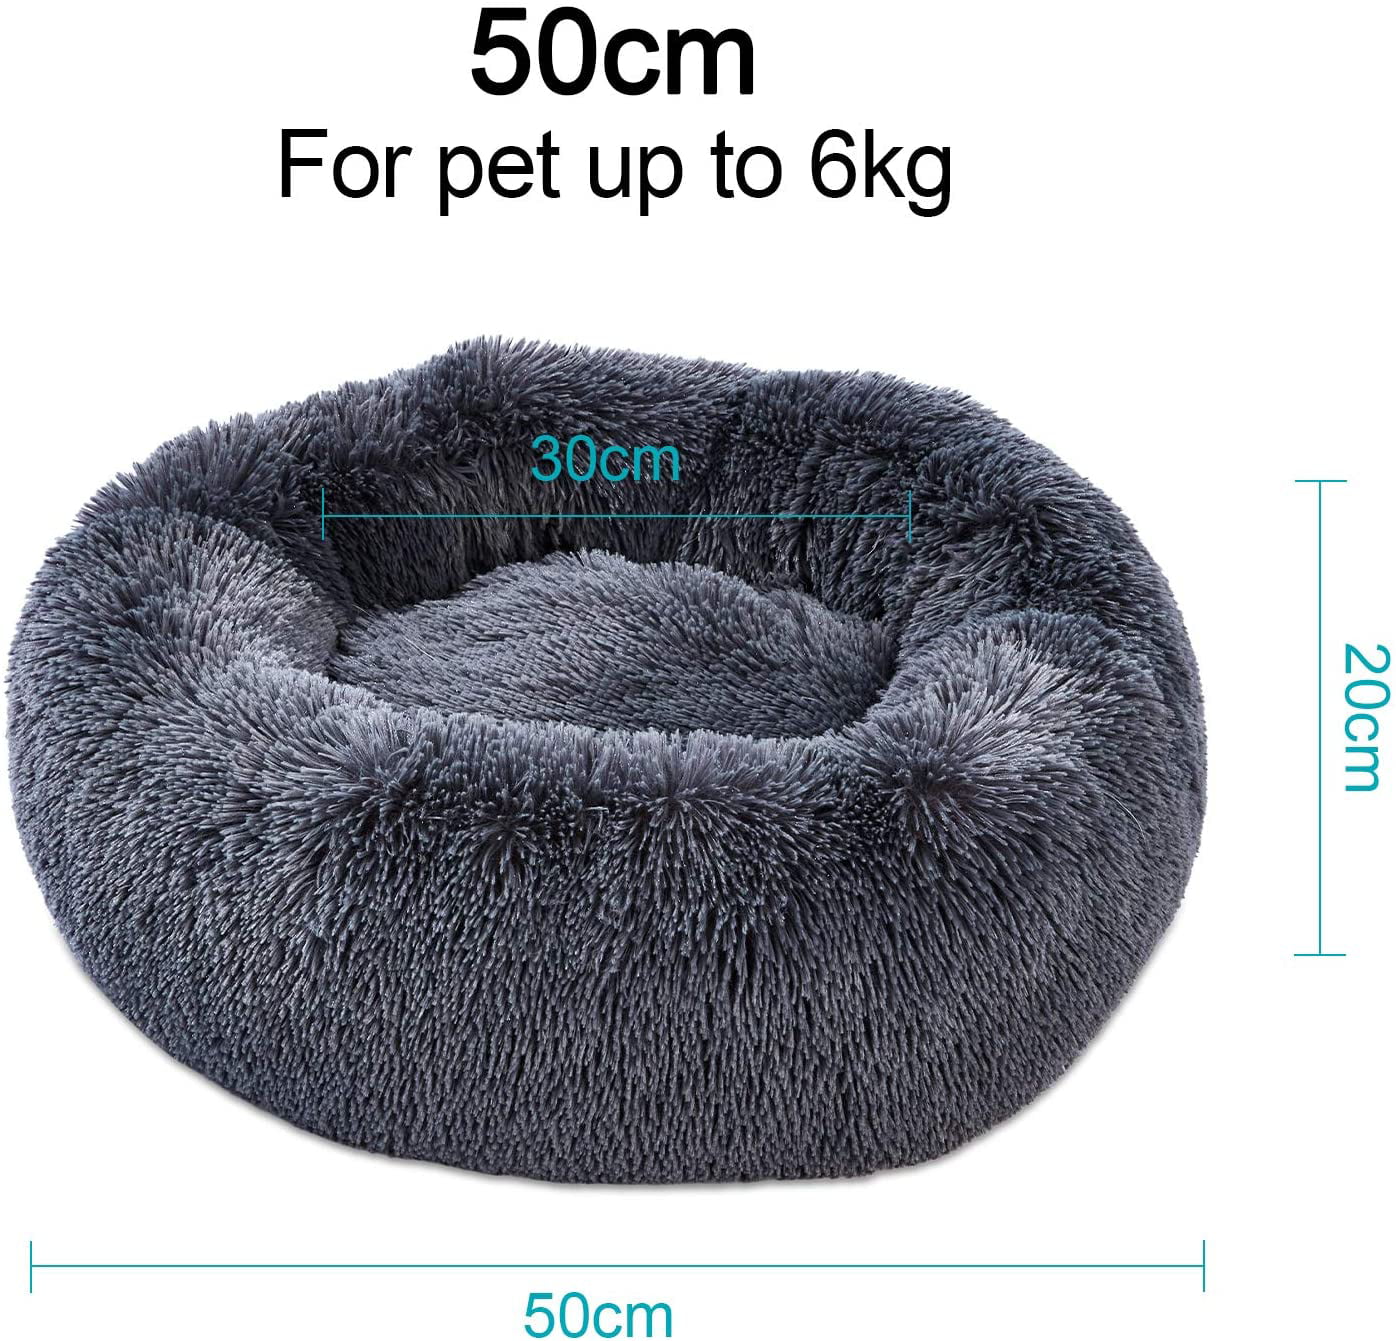 Anti-Slip Bottom Grey Snuggle Pet Round Cushion Sofa Bed for Cat and Puppy Small Medium Dog Toozey Cosy Donut Dog Bed Medium Washable Fluffy Plush Cuddler Calming Dog Bed Kennel Ø 60cm/23.6in 